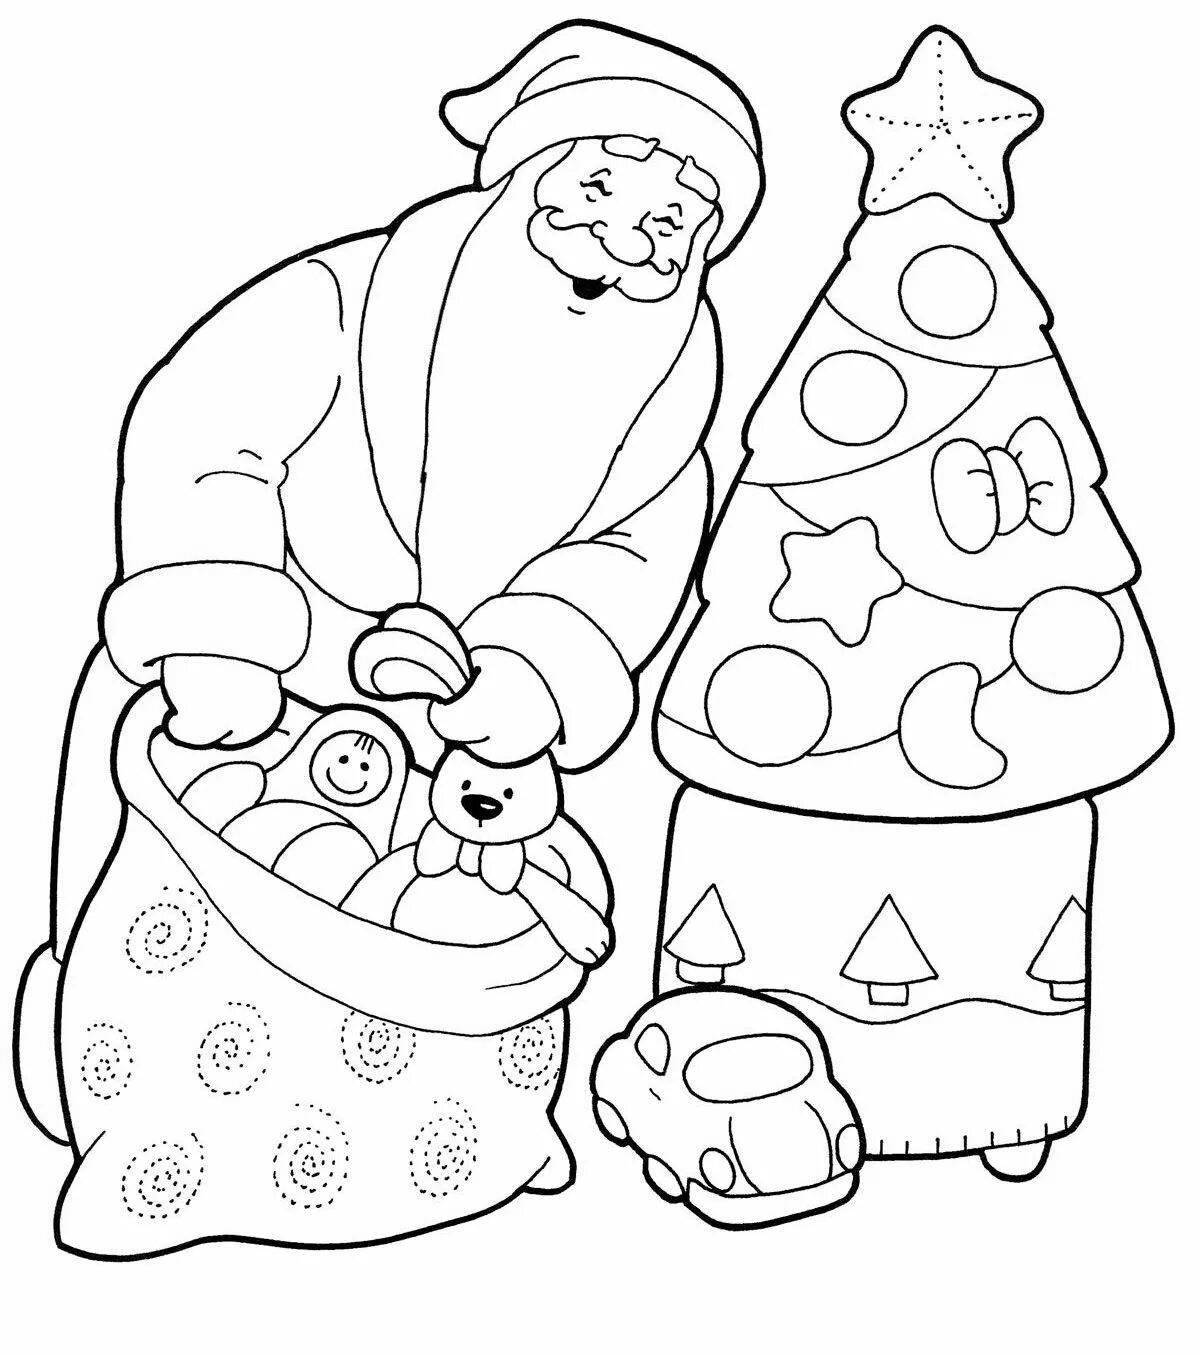 Adorable Santa Claus coloring book for kids 2-3 years old